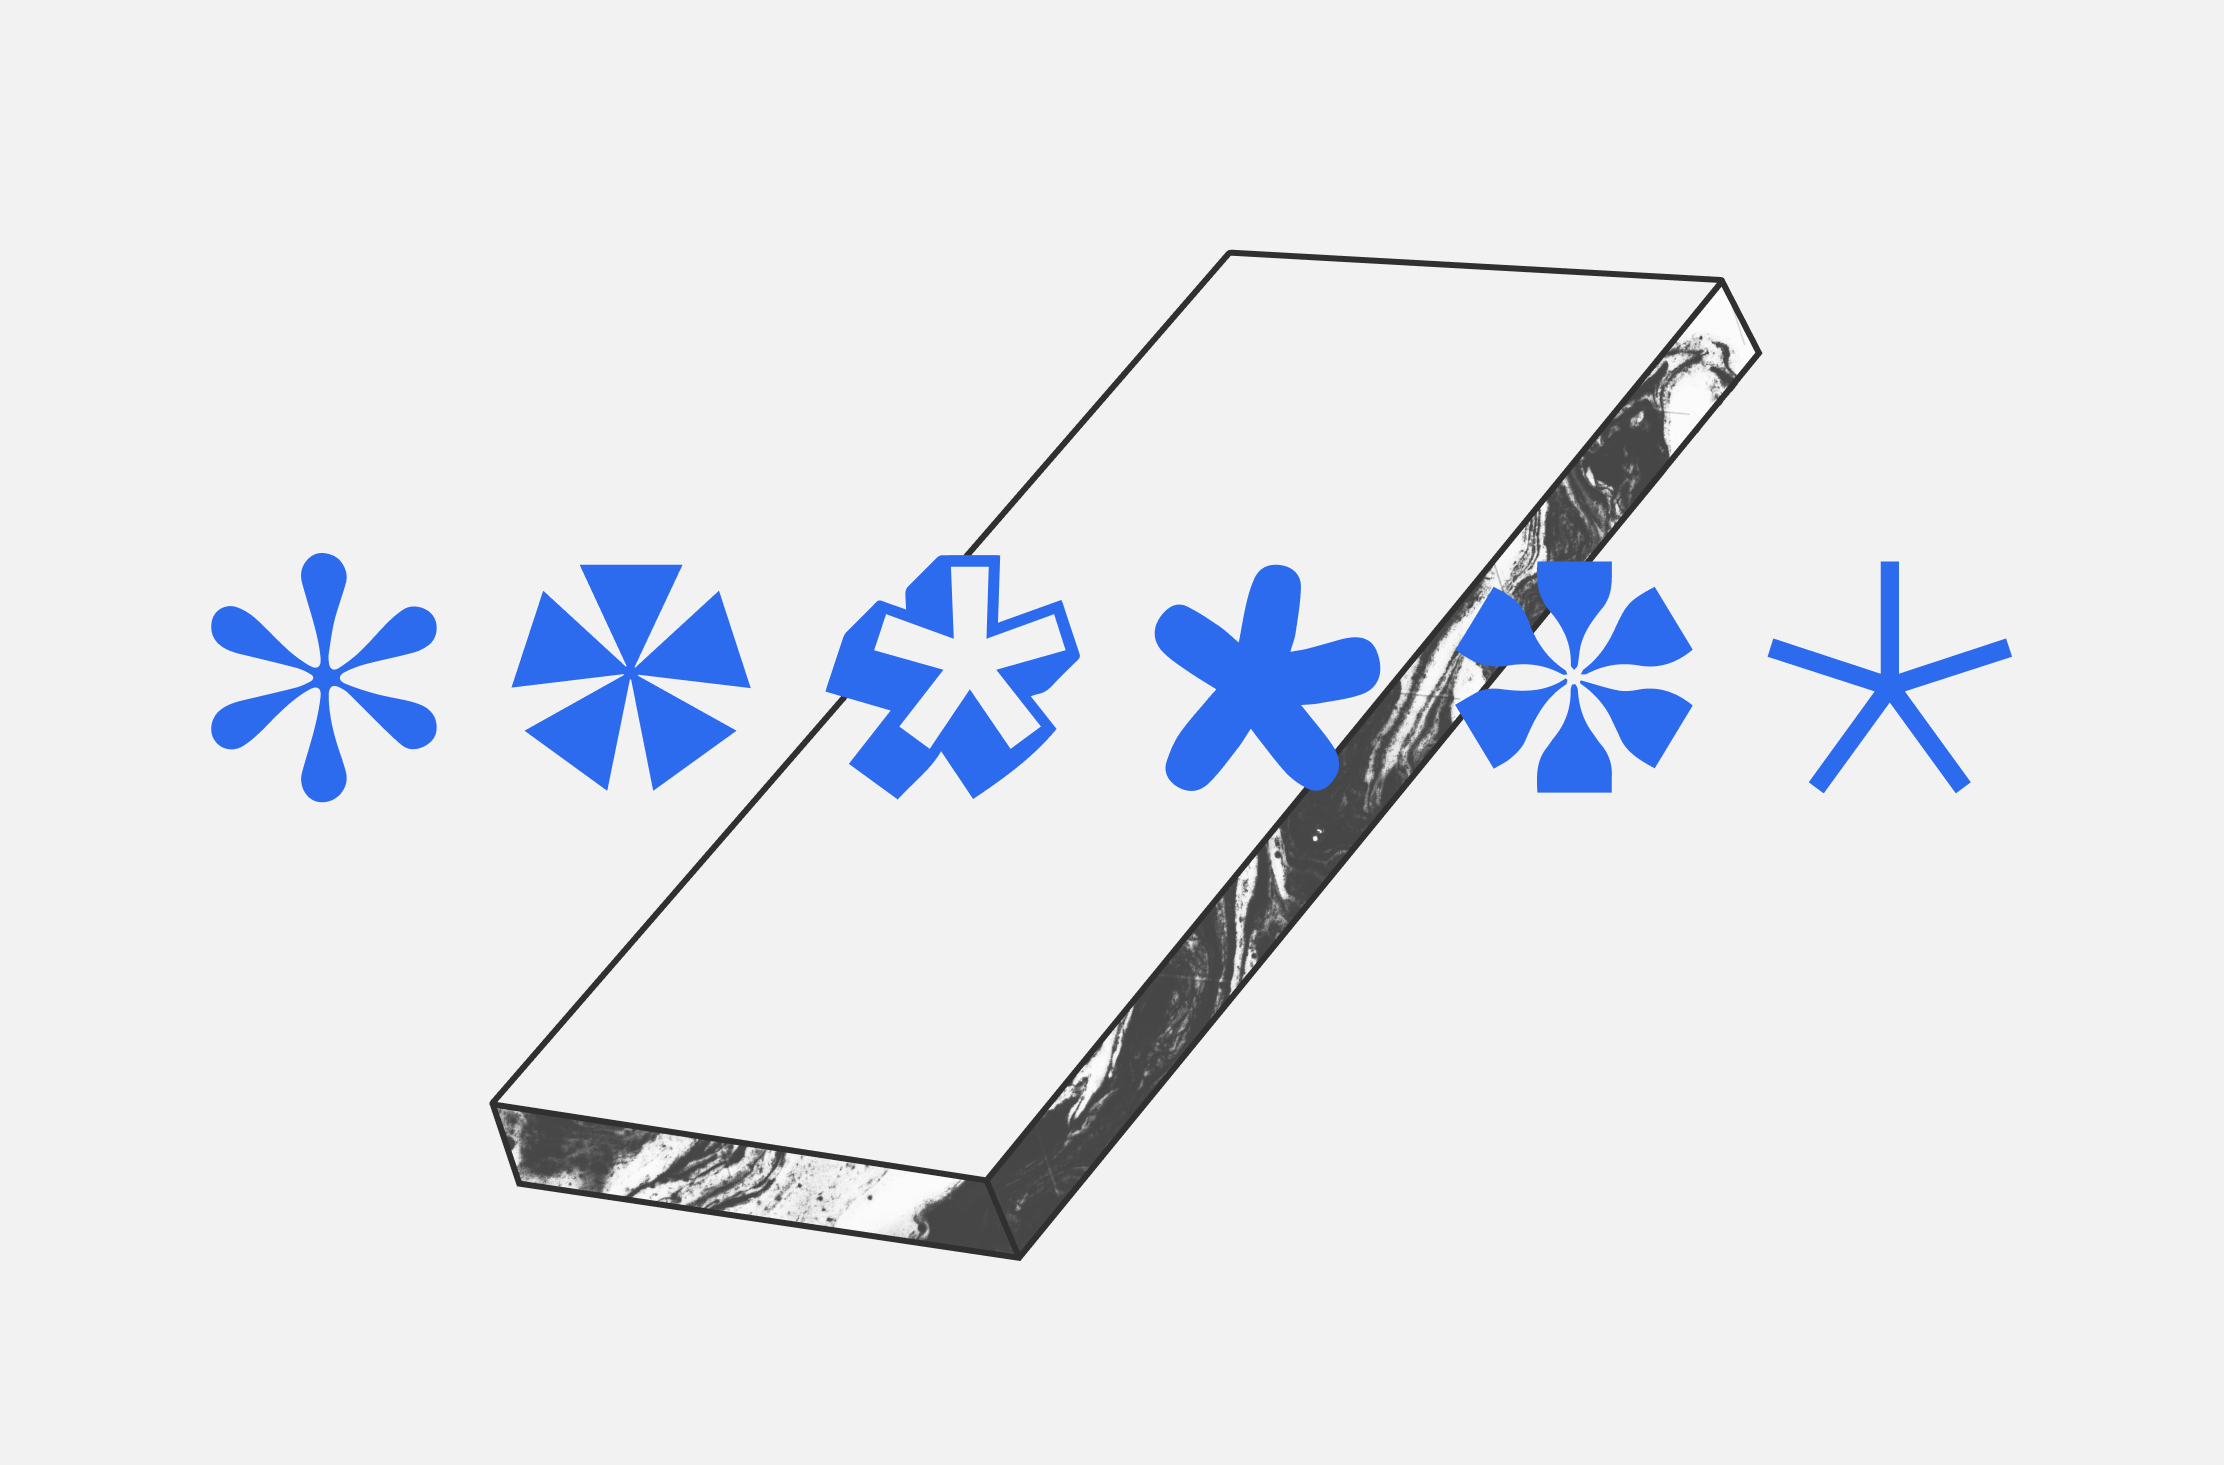 An illustration of asterisks superimposed over the shape of a smartphone.